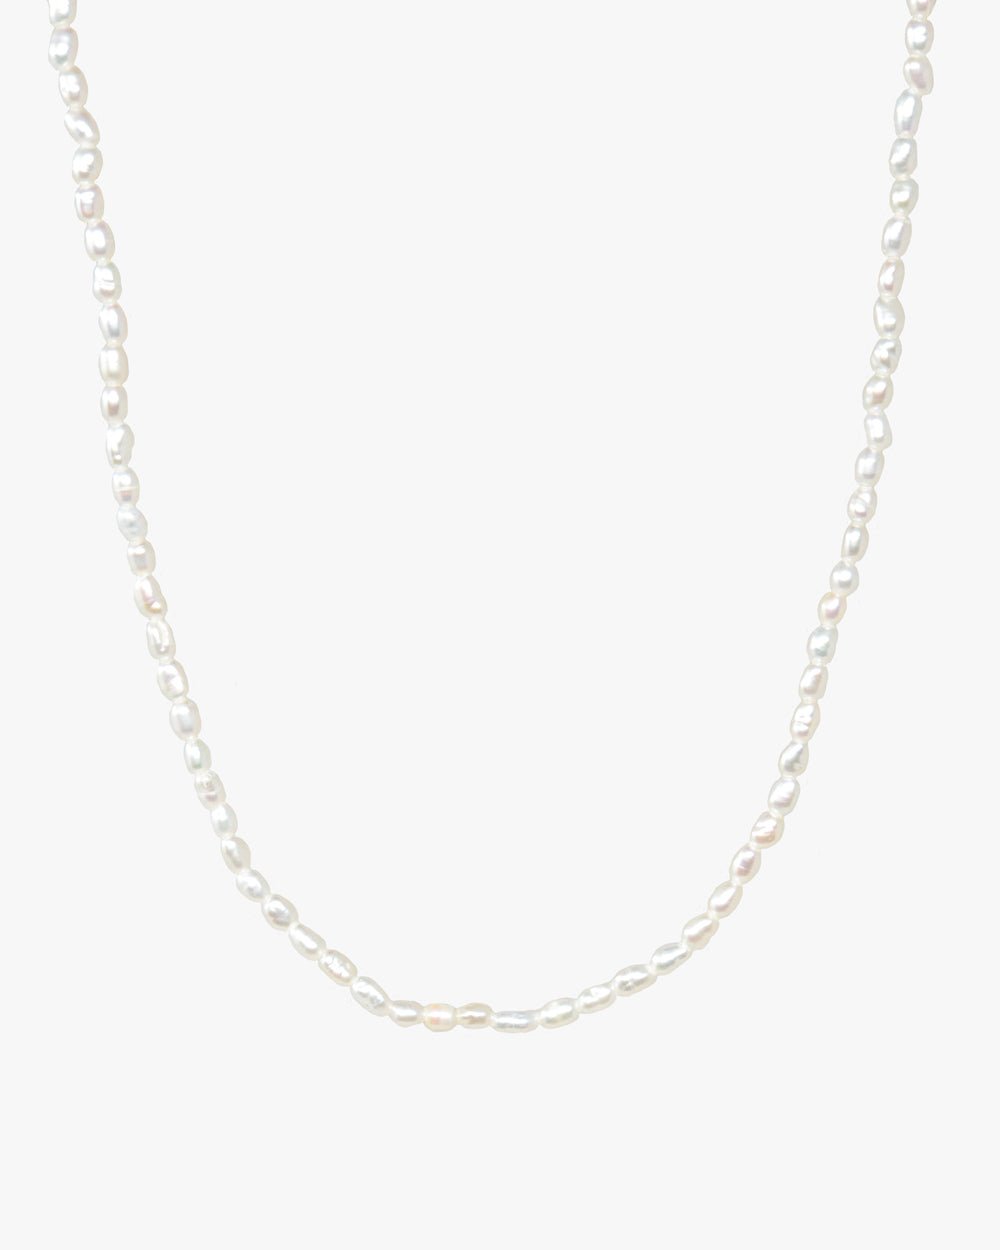 DEEPTI SEED PEARL NECKLACE - Shop Cupcakes and Cashmere